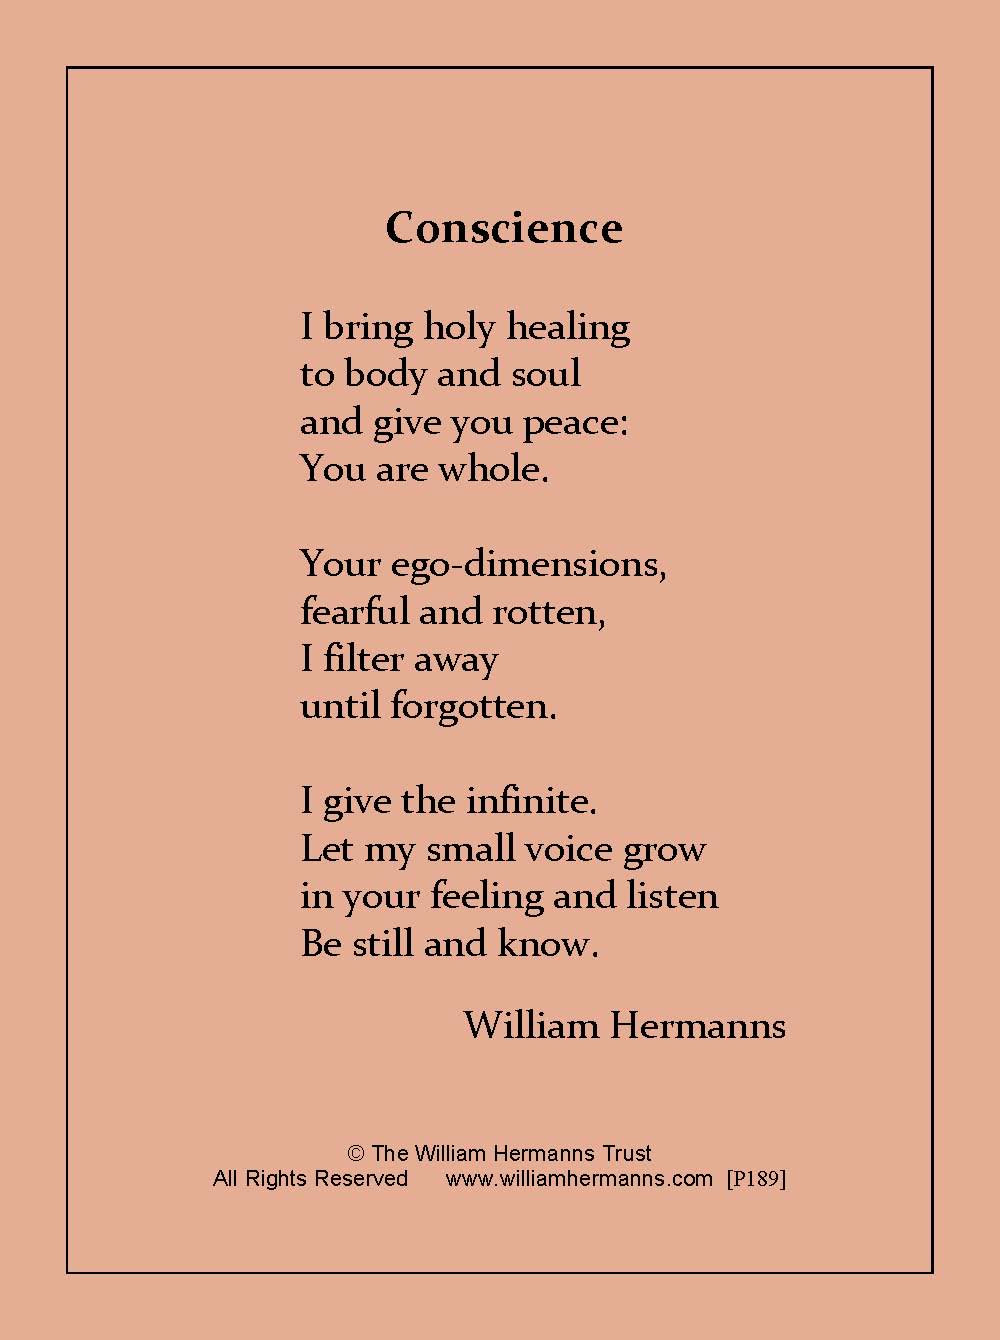 Conscience by Willilam Hermanns